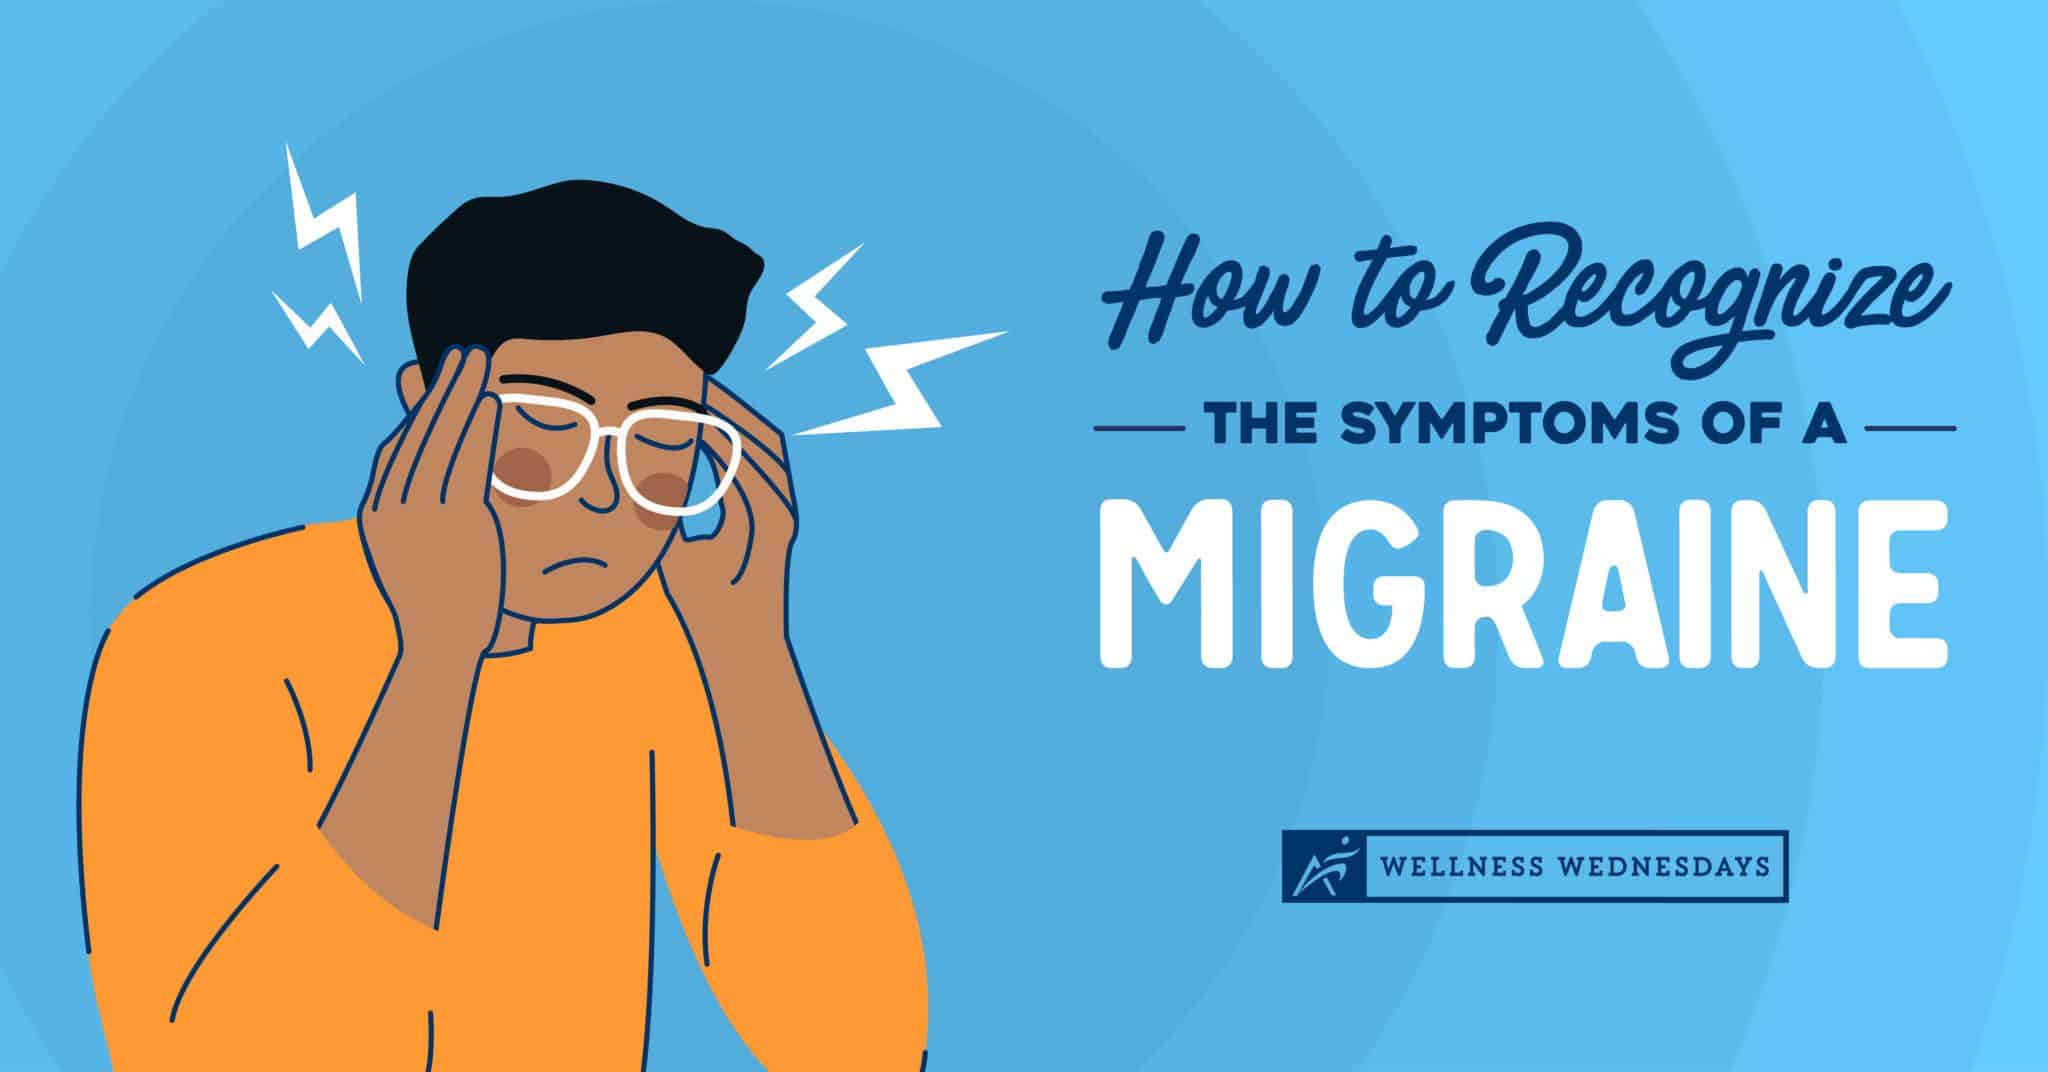 How to Recognize the Symptoms of a Migraine